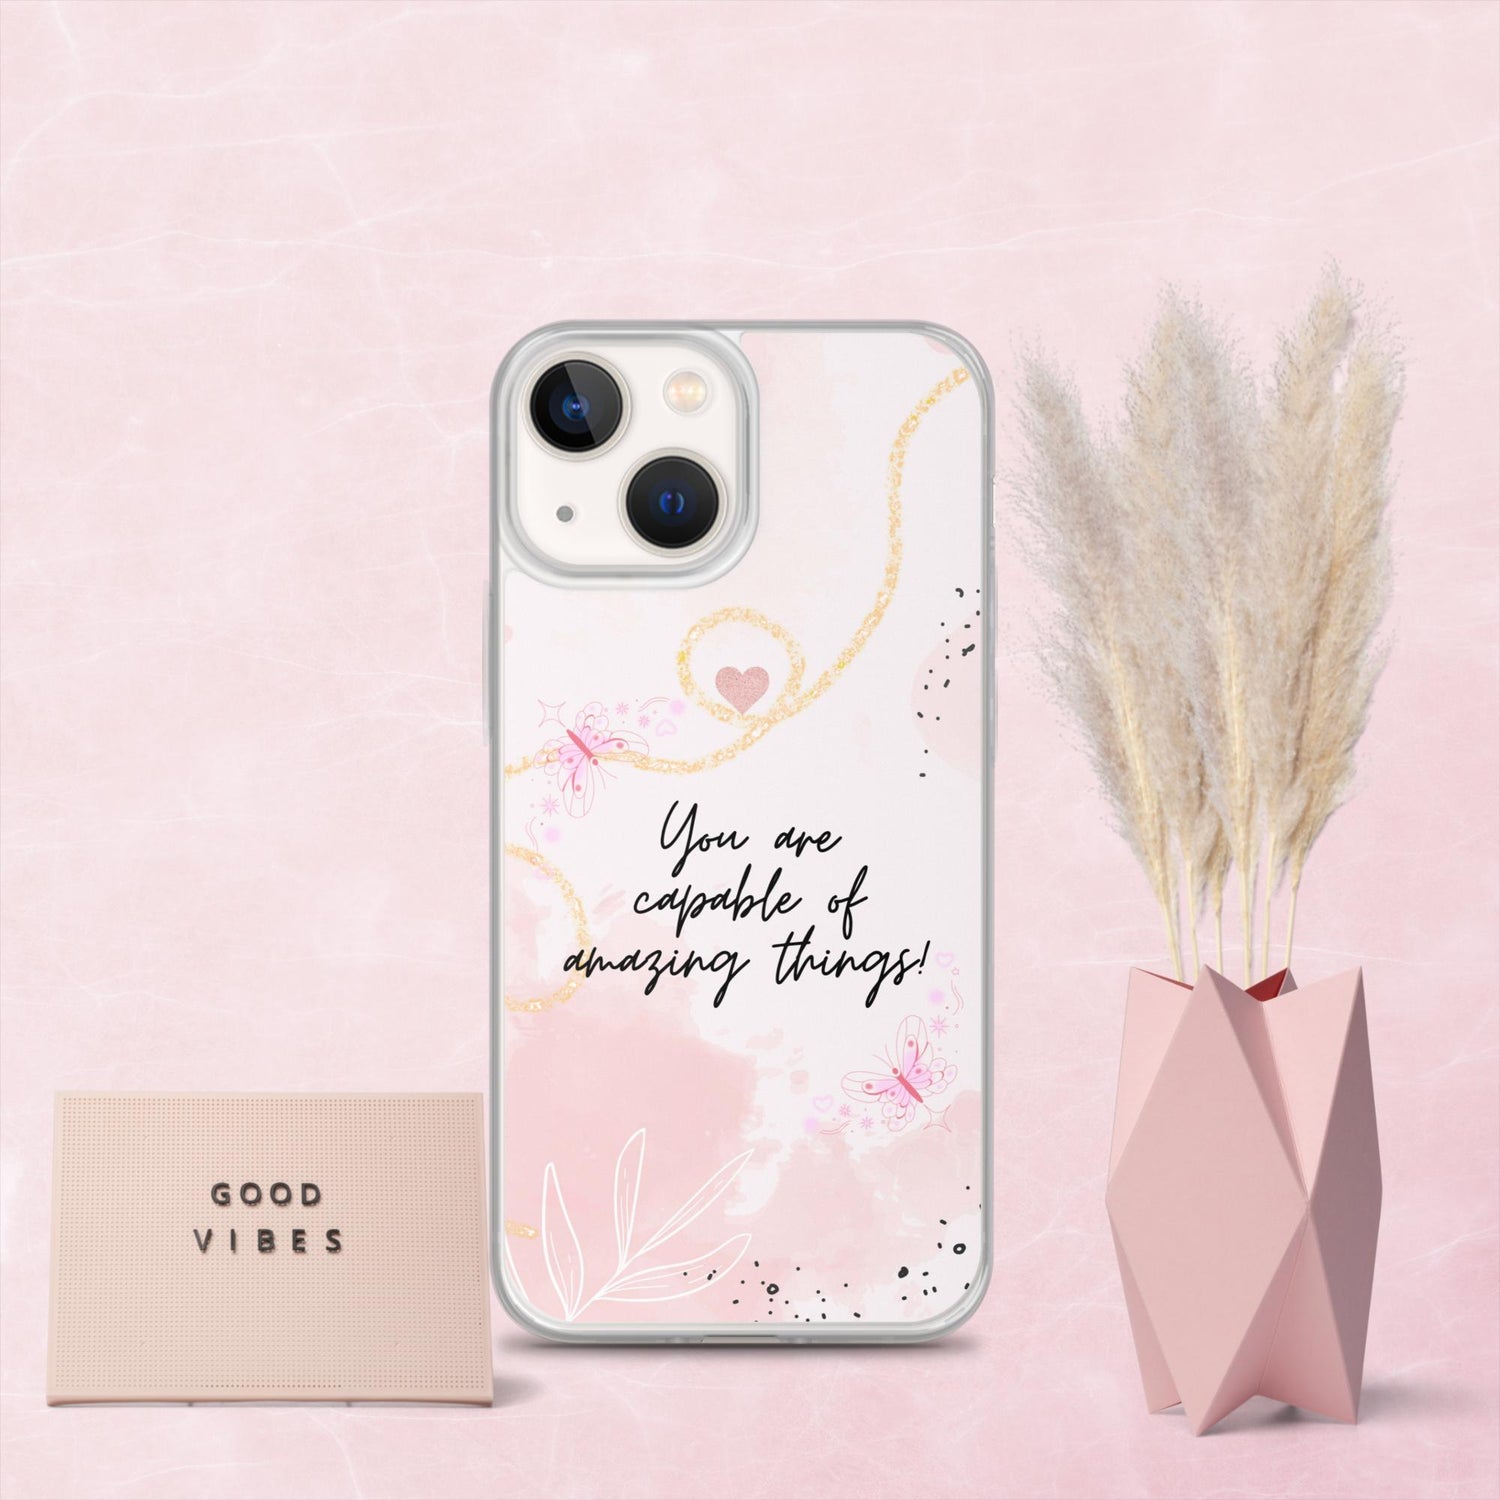 Being Capable - Iphone Case